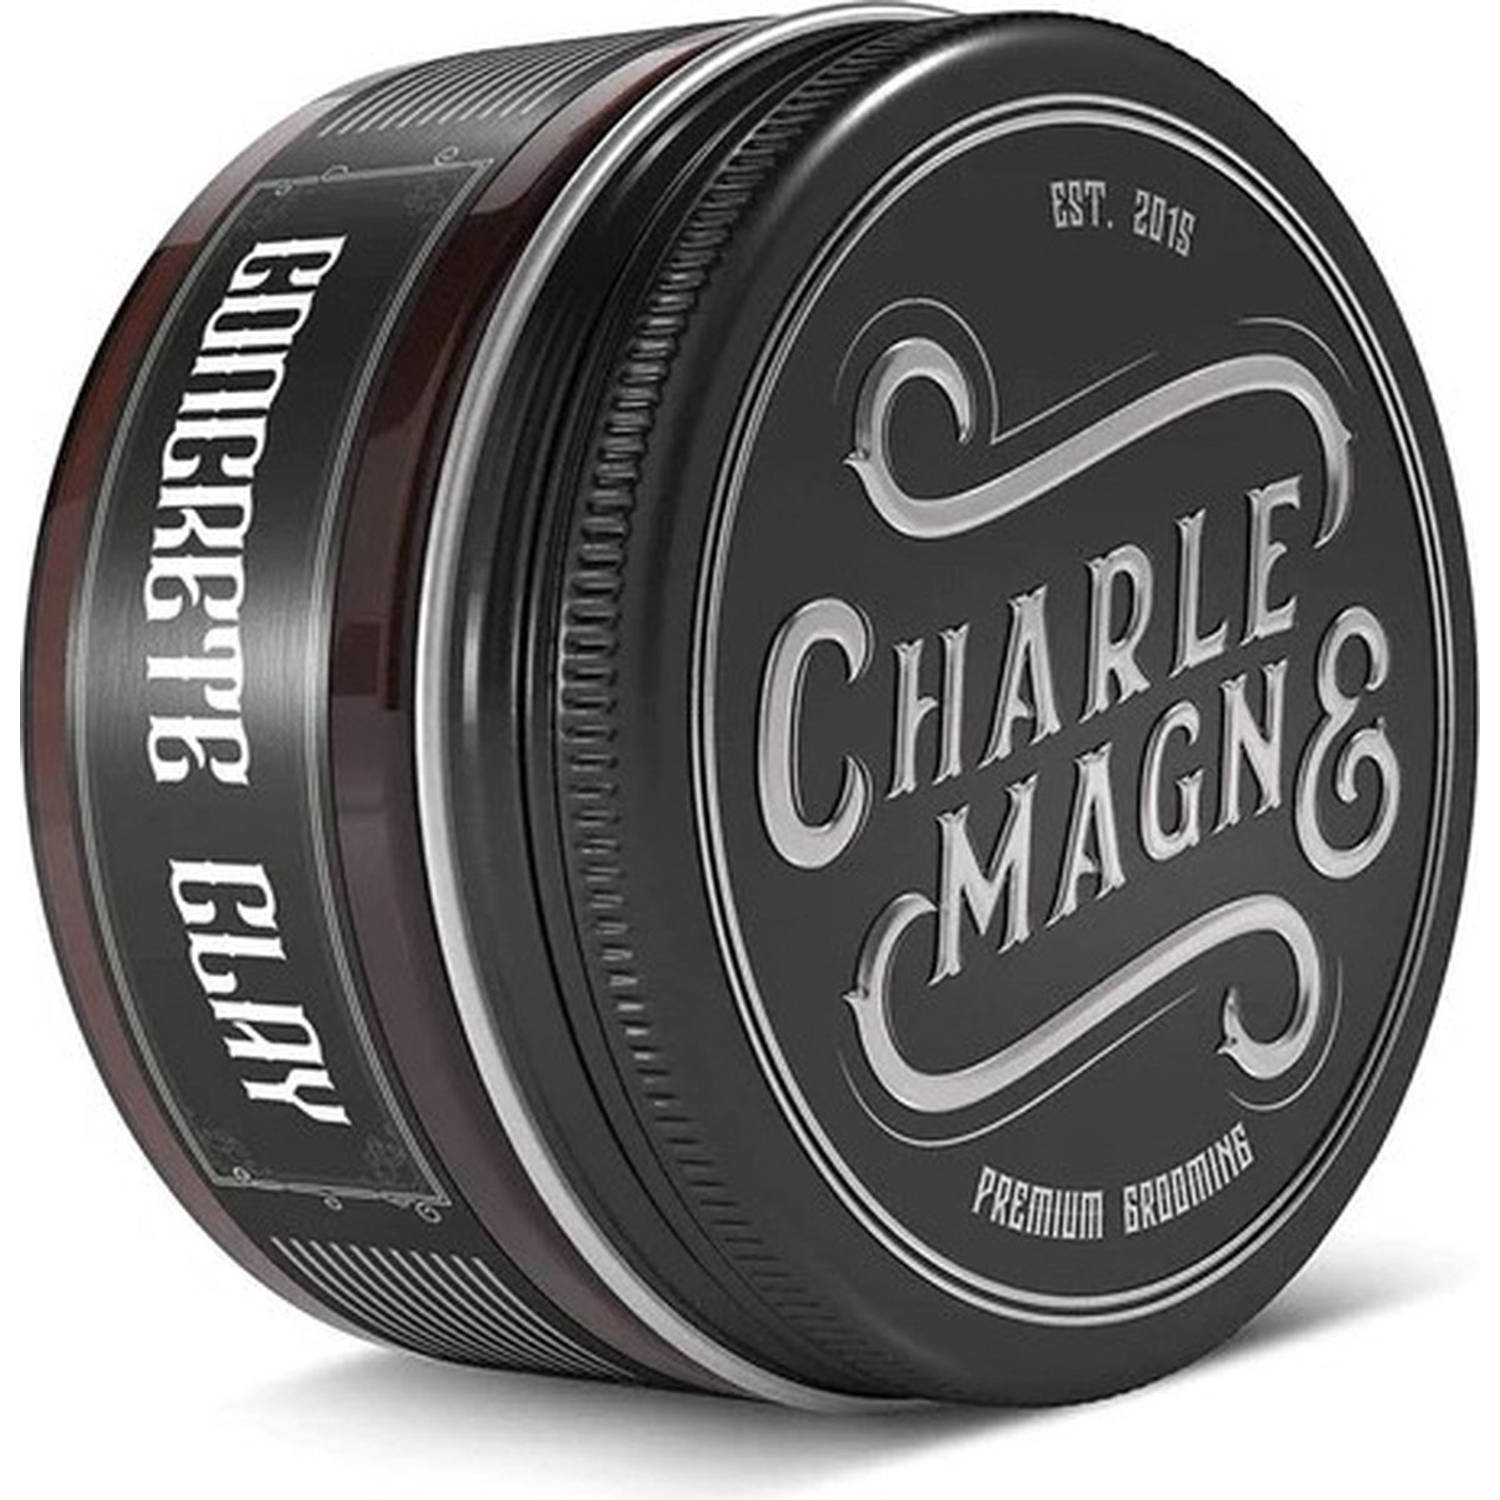 Charlemagne Concrete Clay - Pomade